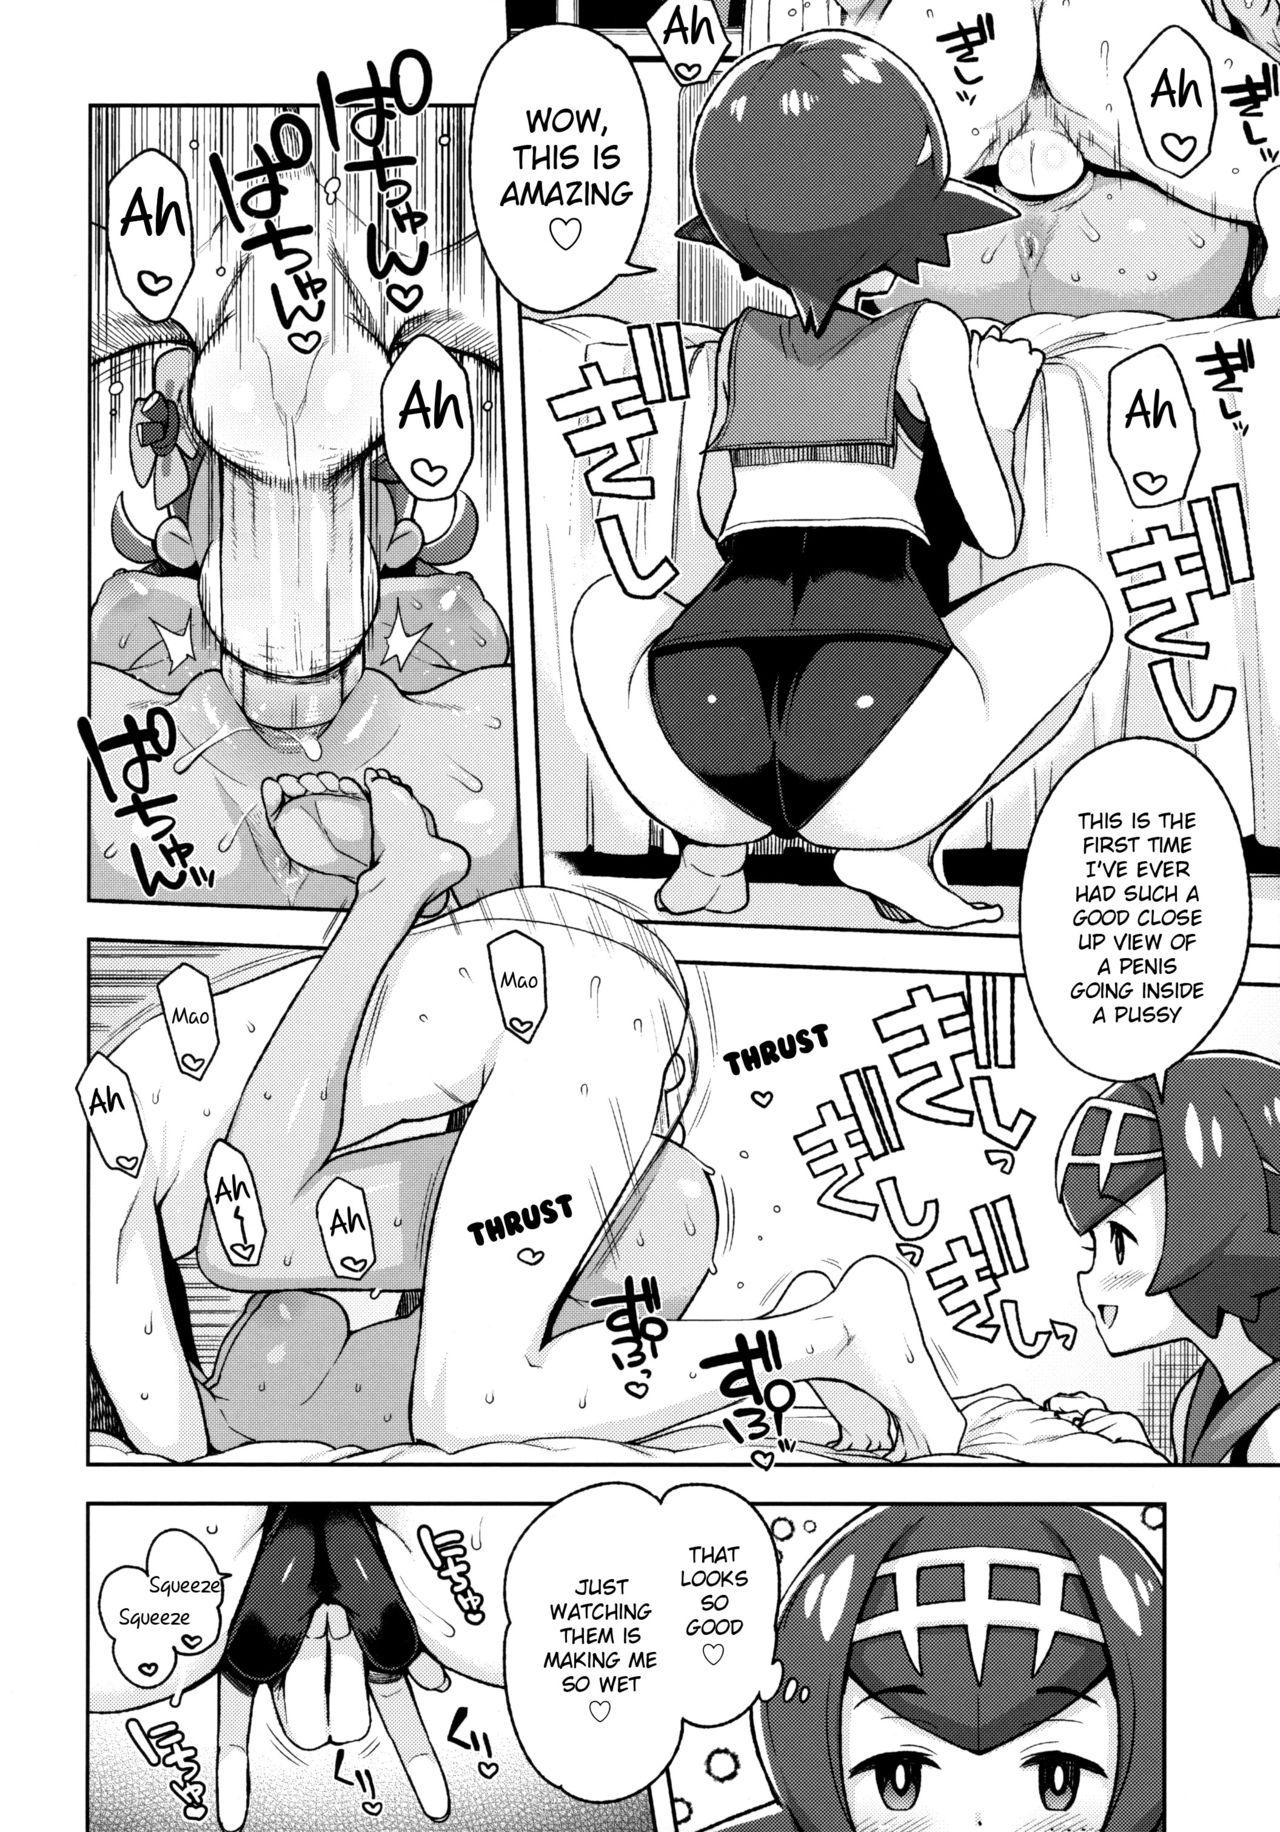 Squirters MAO FRIENDS2 - Pokemon | pocket monsters Flash - Page 9